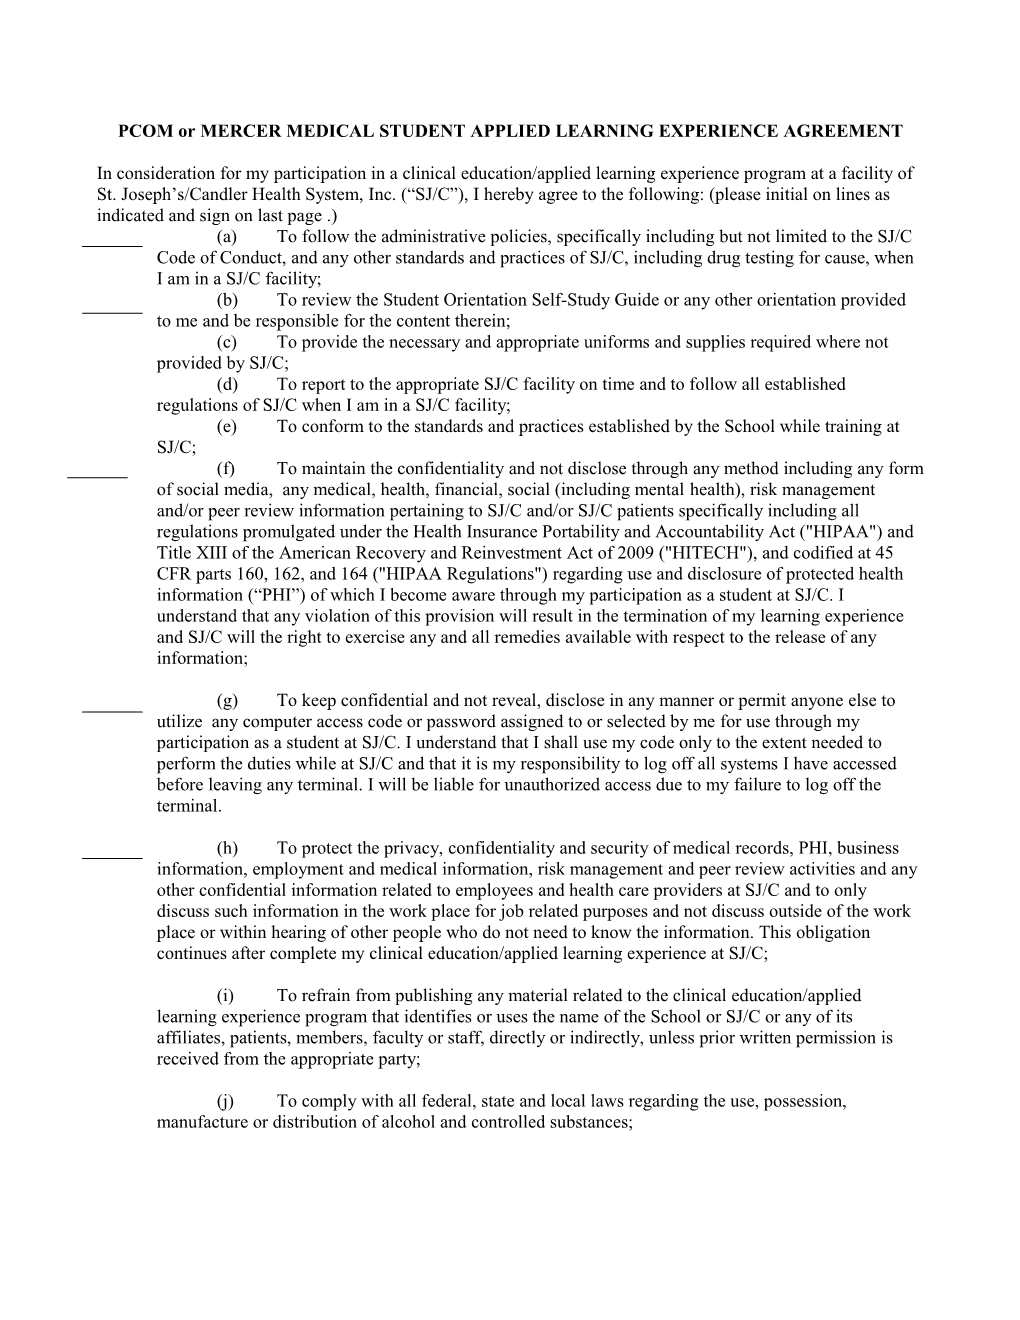 Student Applied Learning Experience Agreement